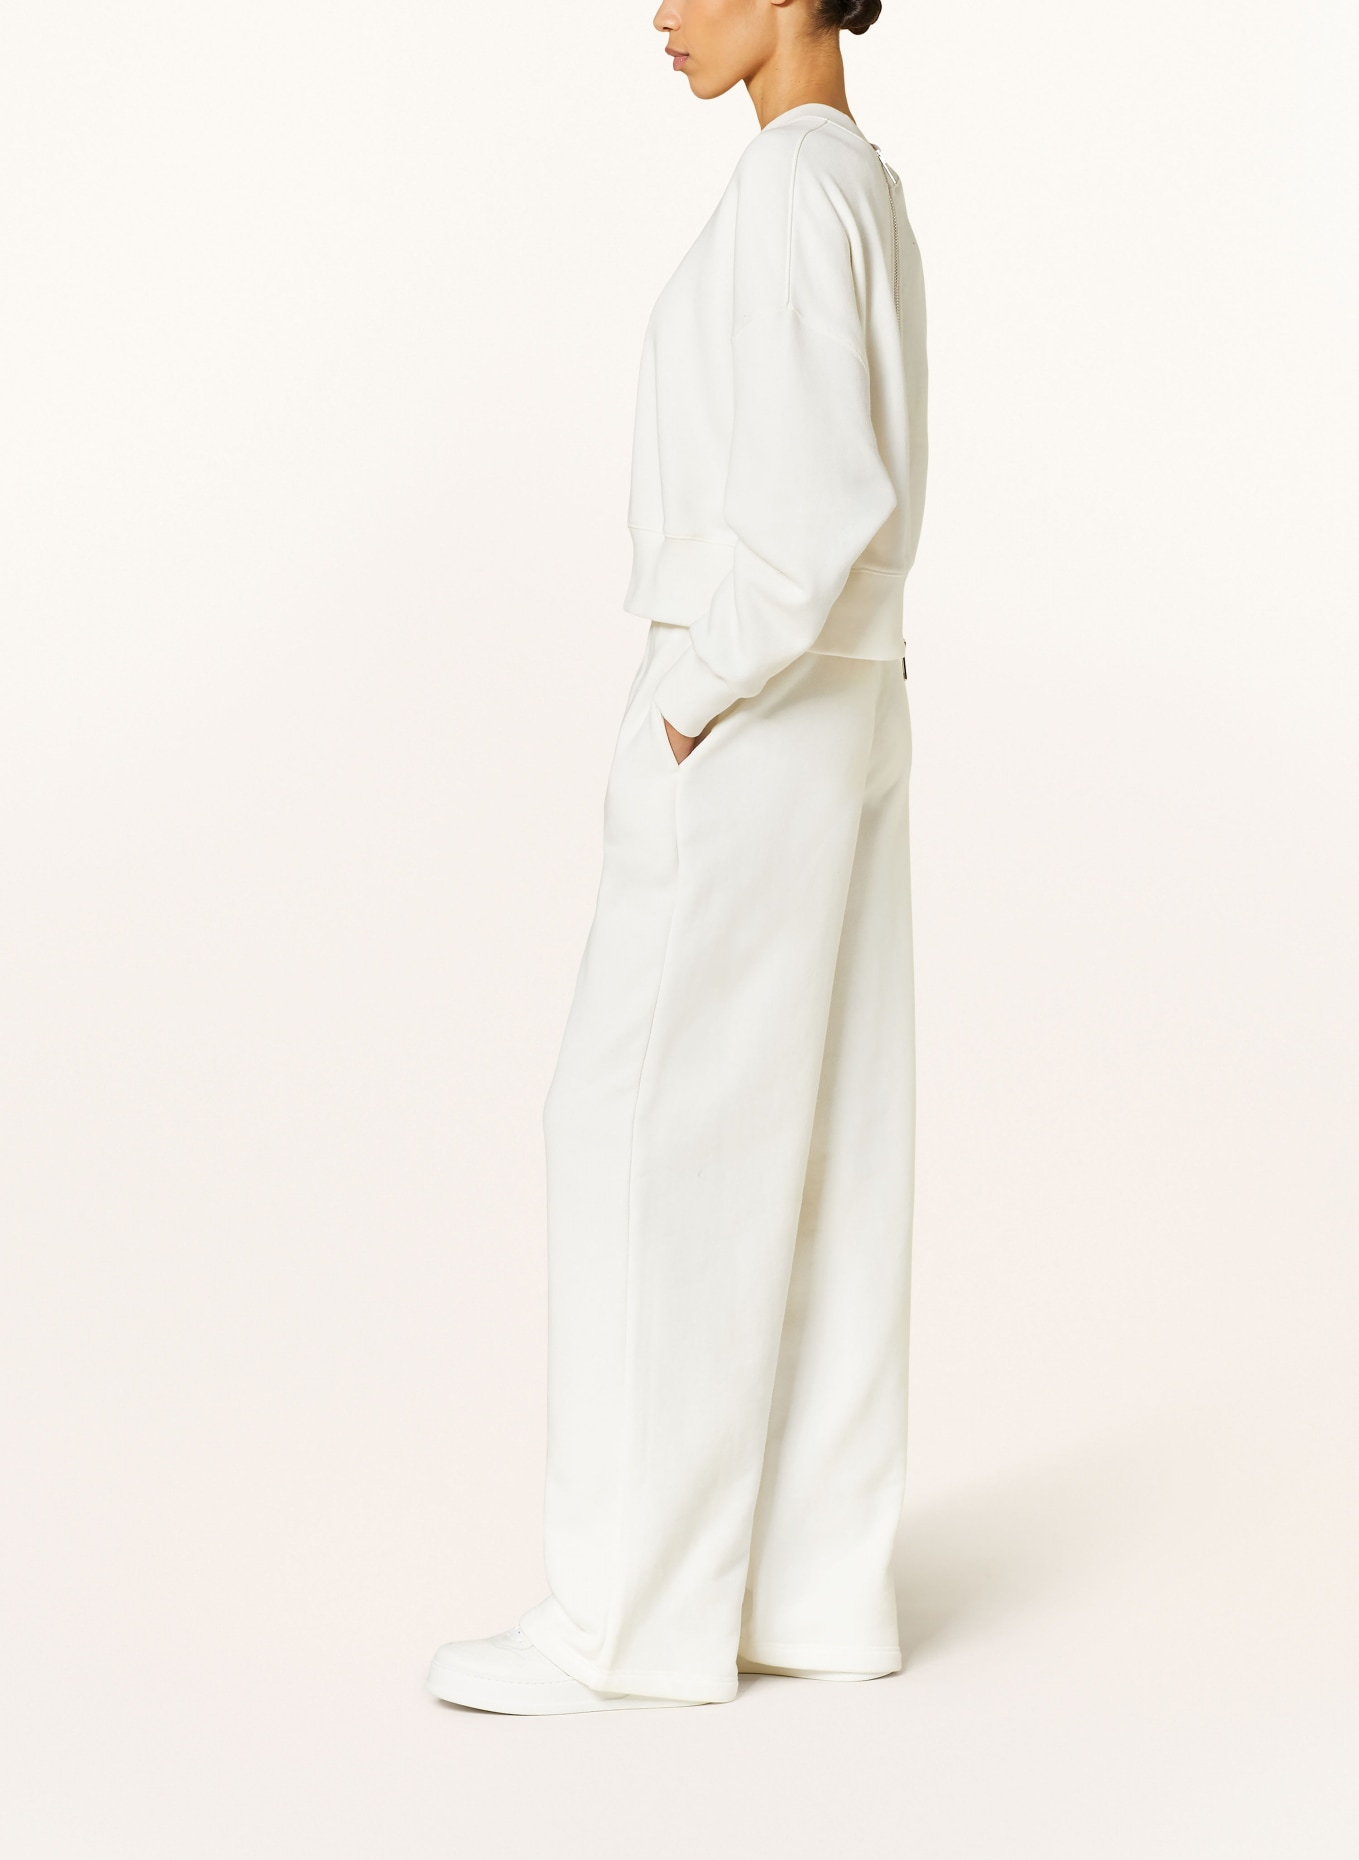 GUCCI Pants in jogger style, Color: WHITE (Image 4)